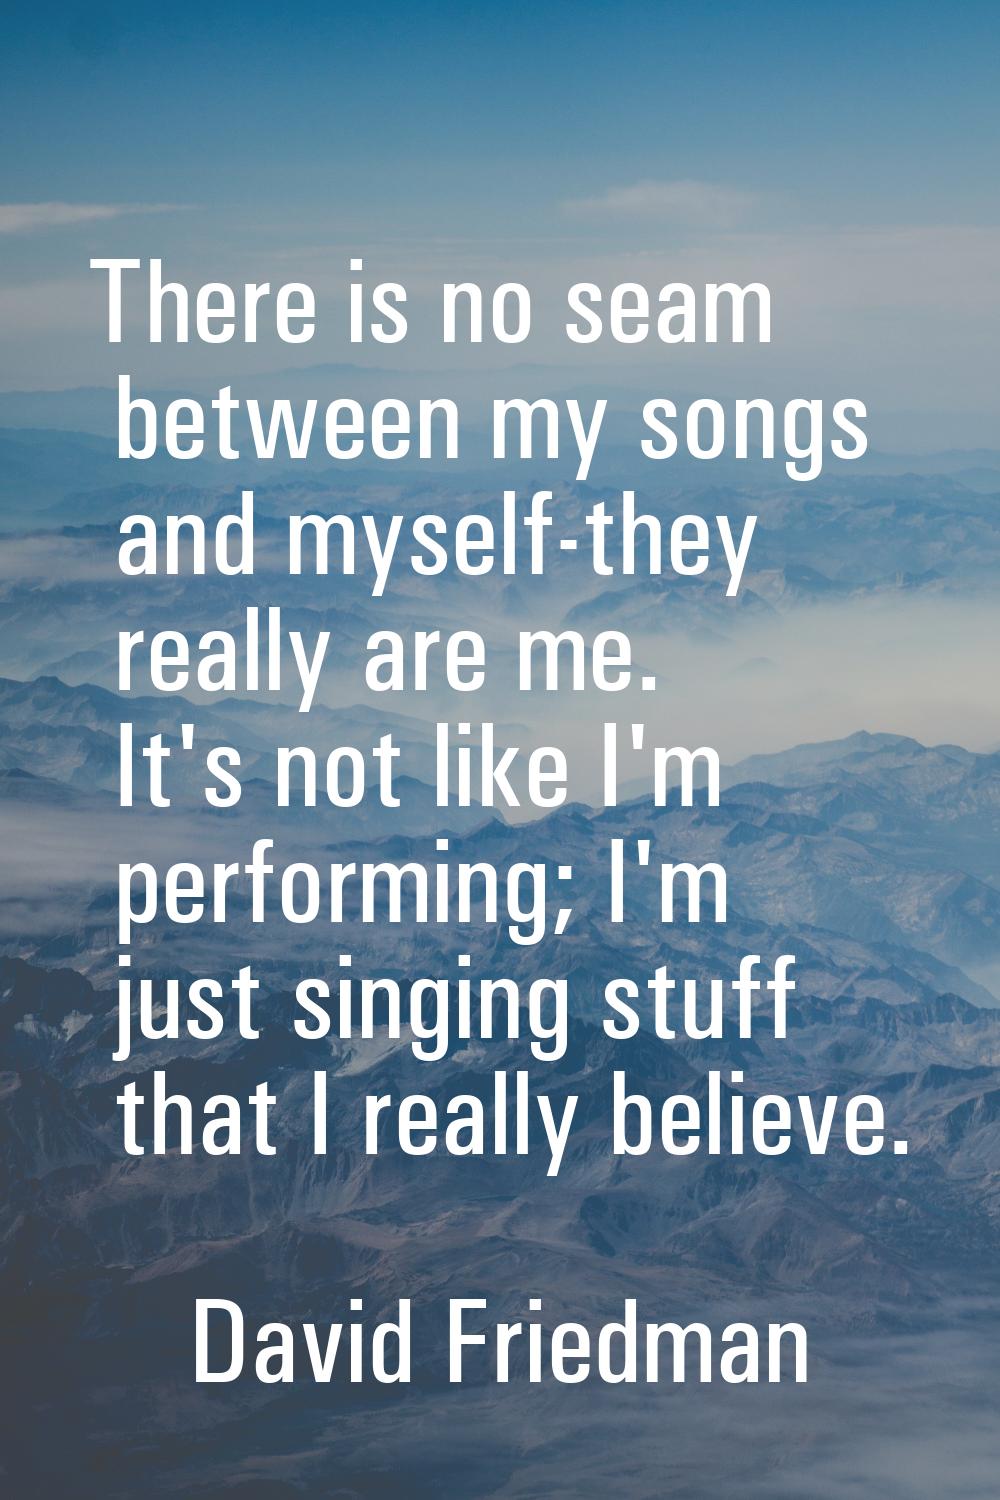 There is no seam between my songs and myself-they really are me. It's not like I'm performing; I'm 